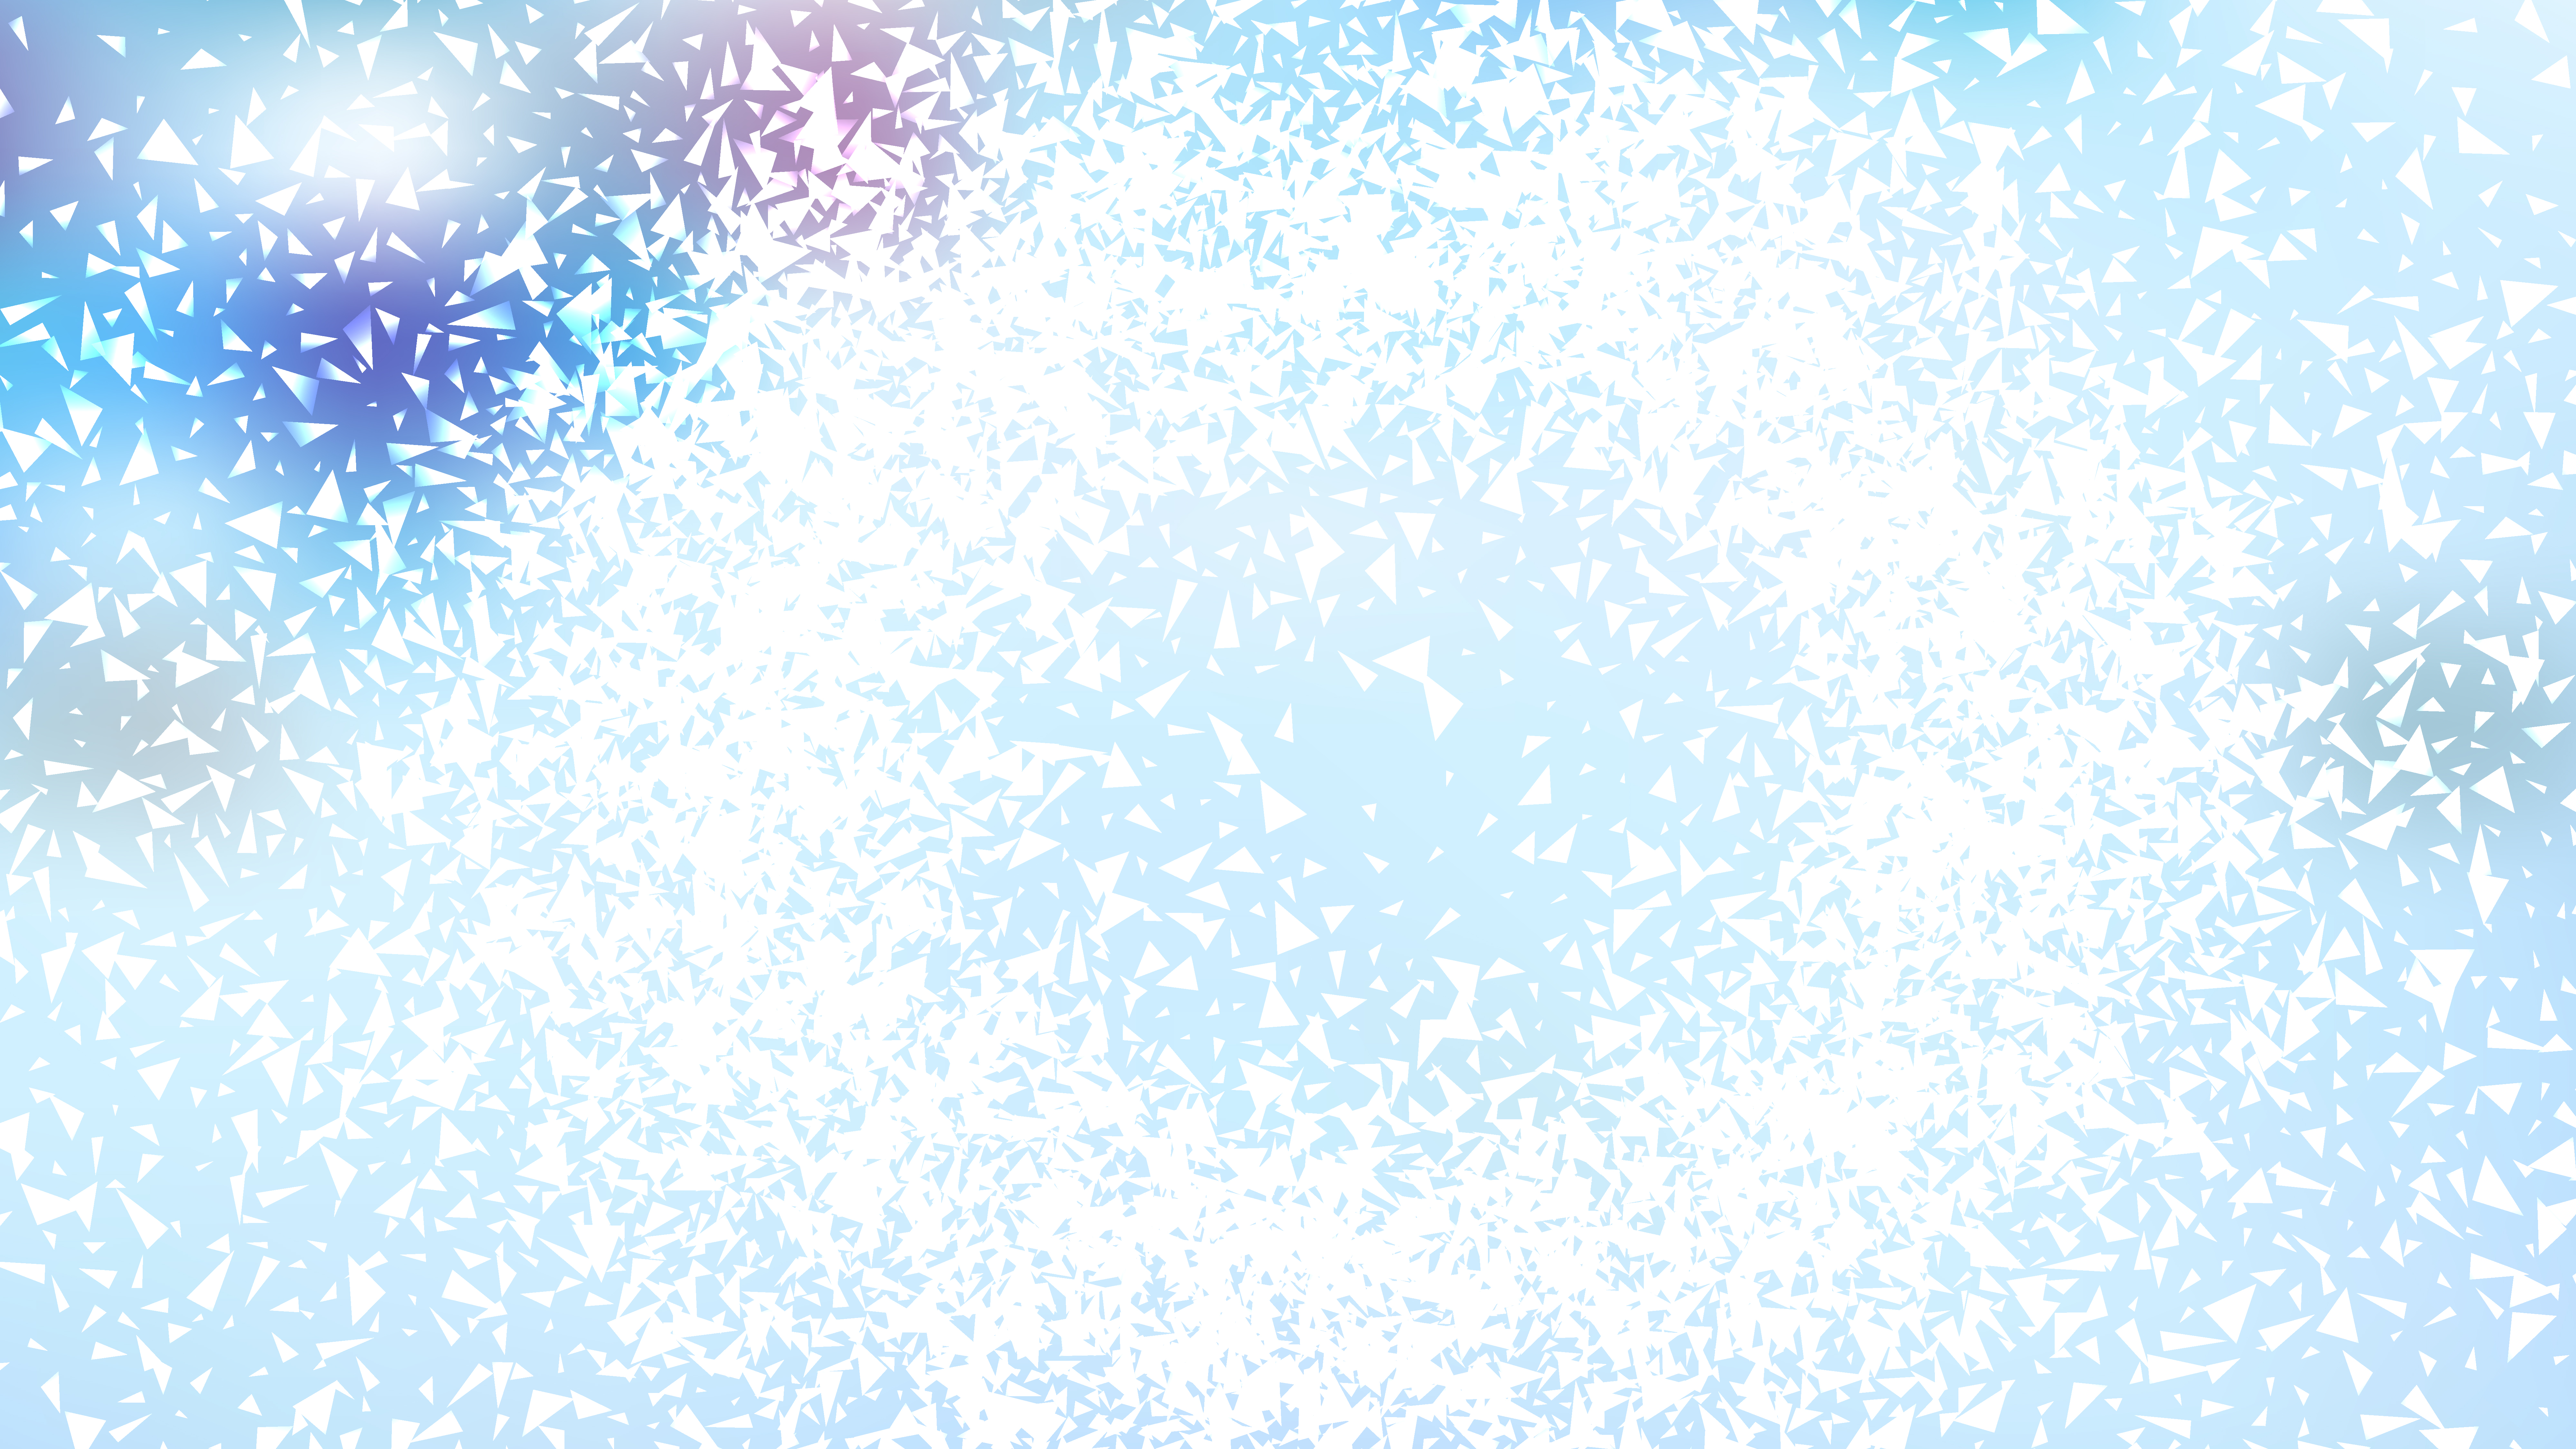 Free Blue and White Sparkles Background